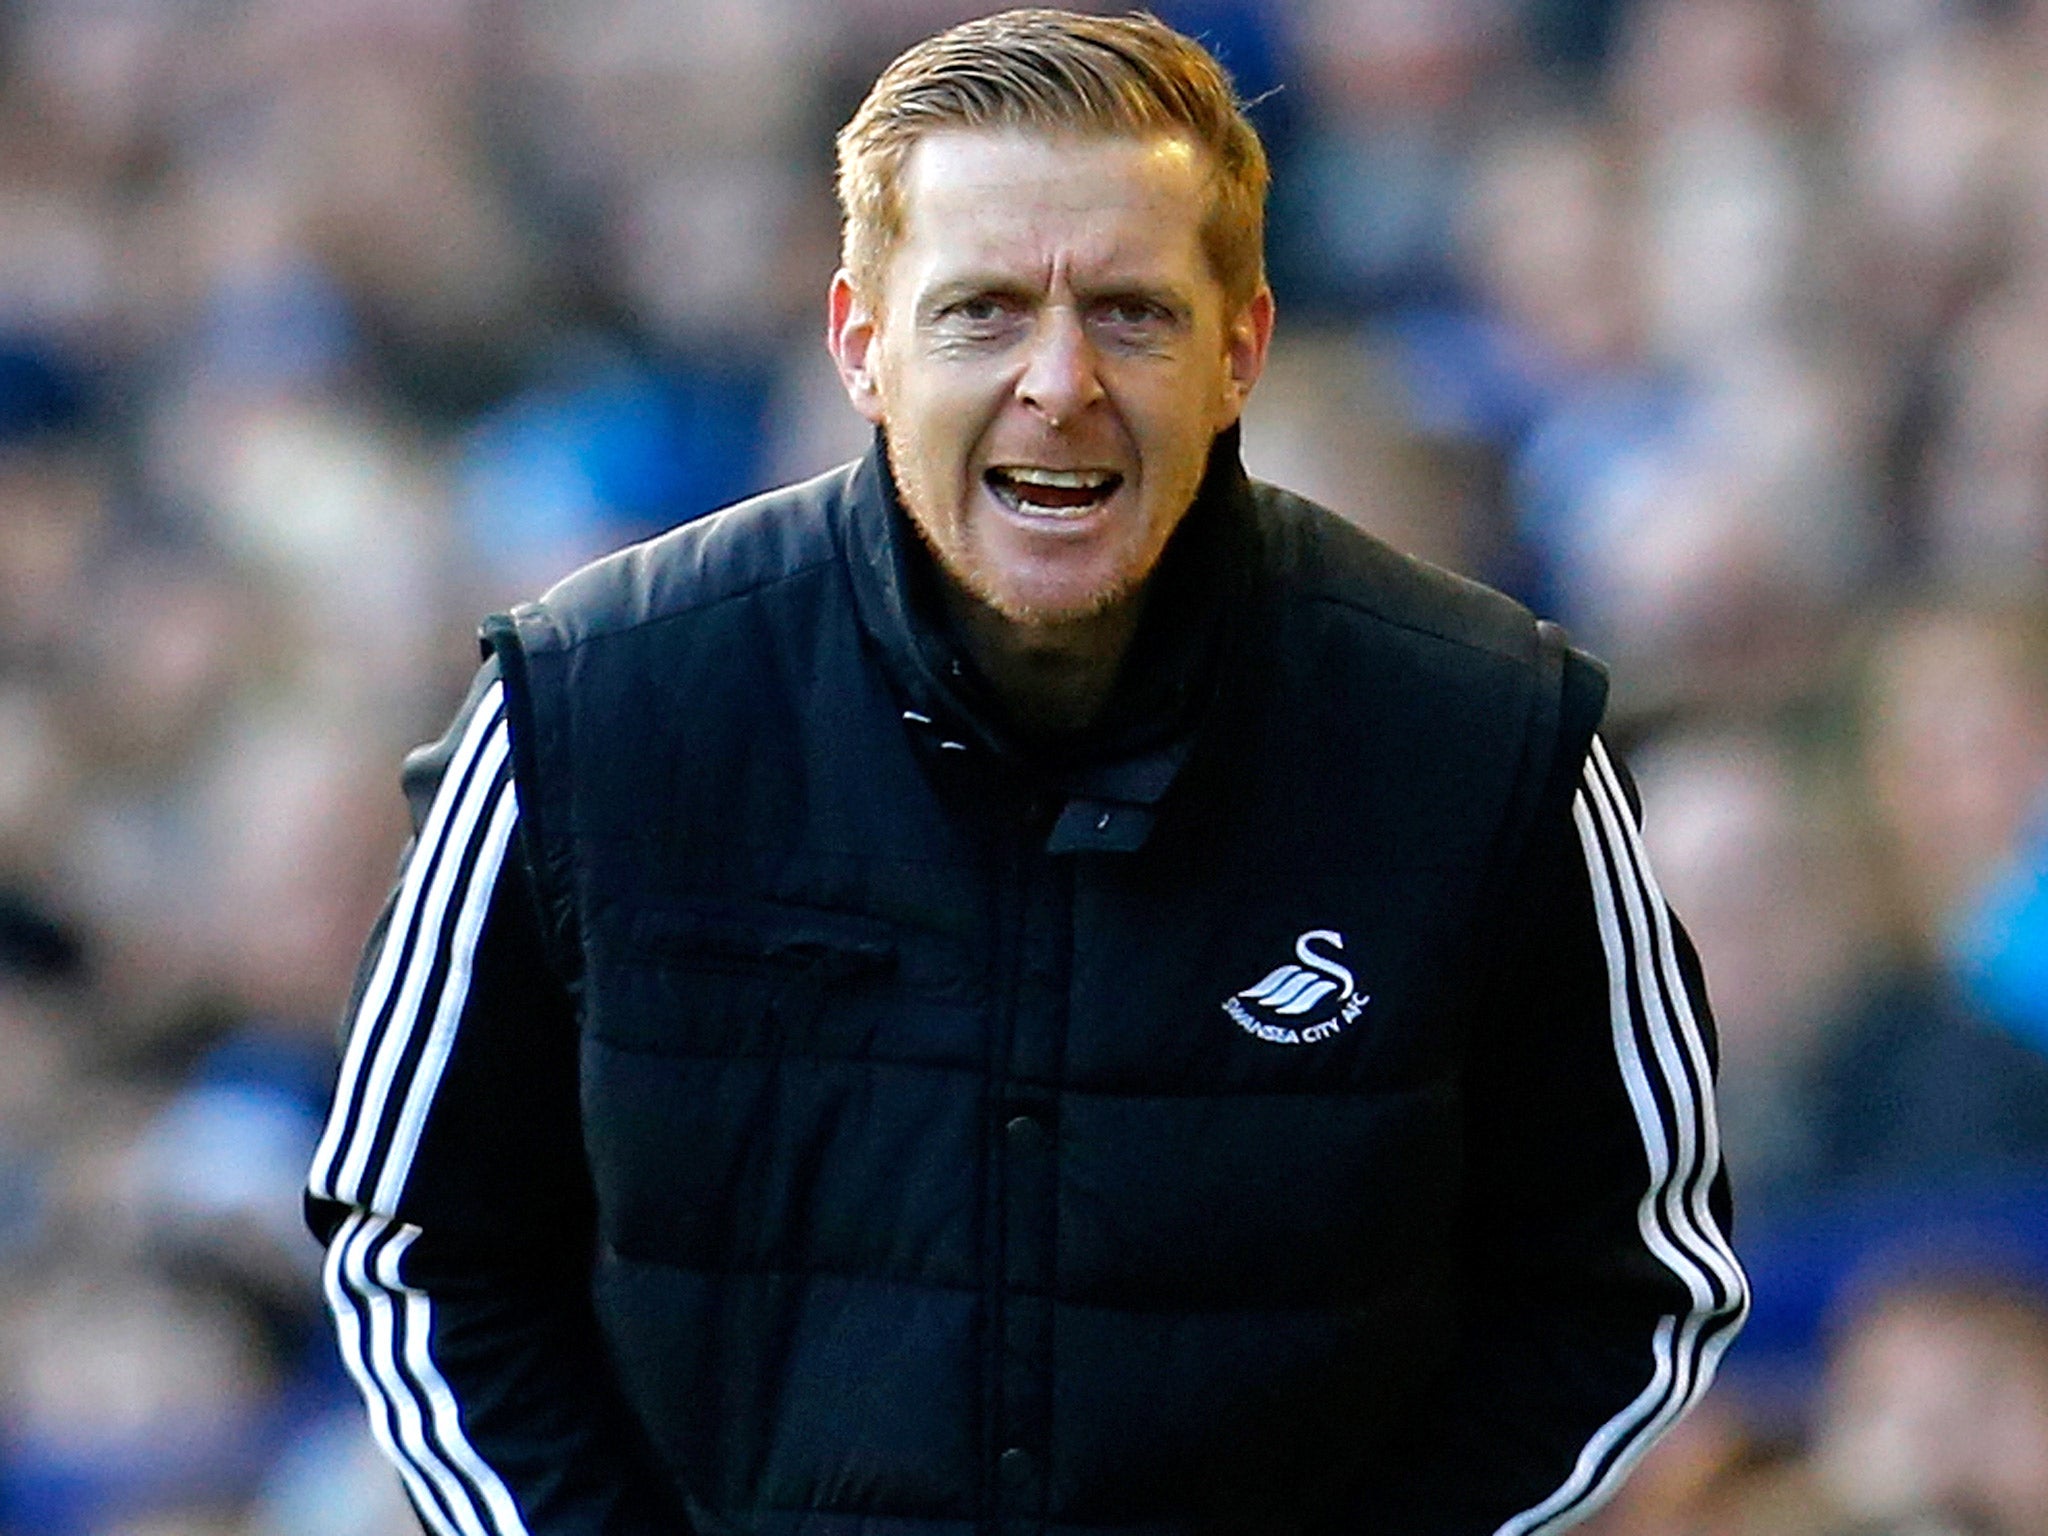 Garry Monk has been appointed Swansea manager